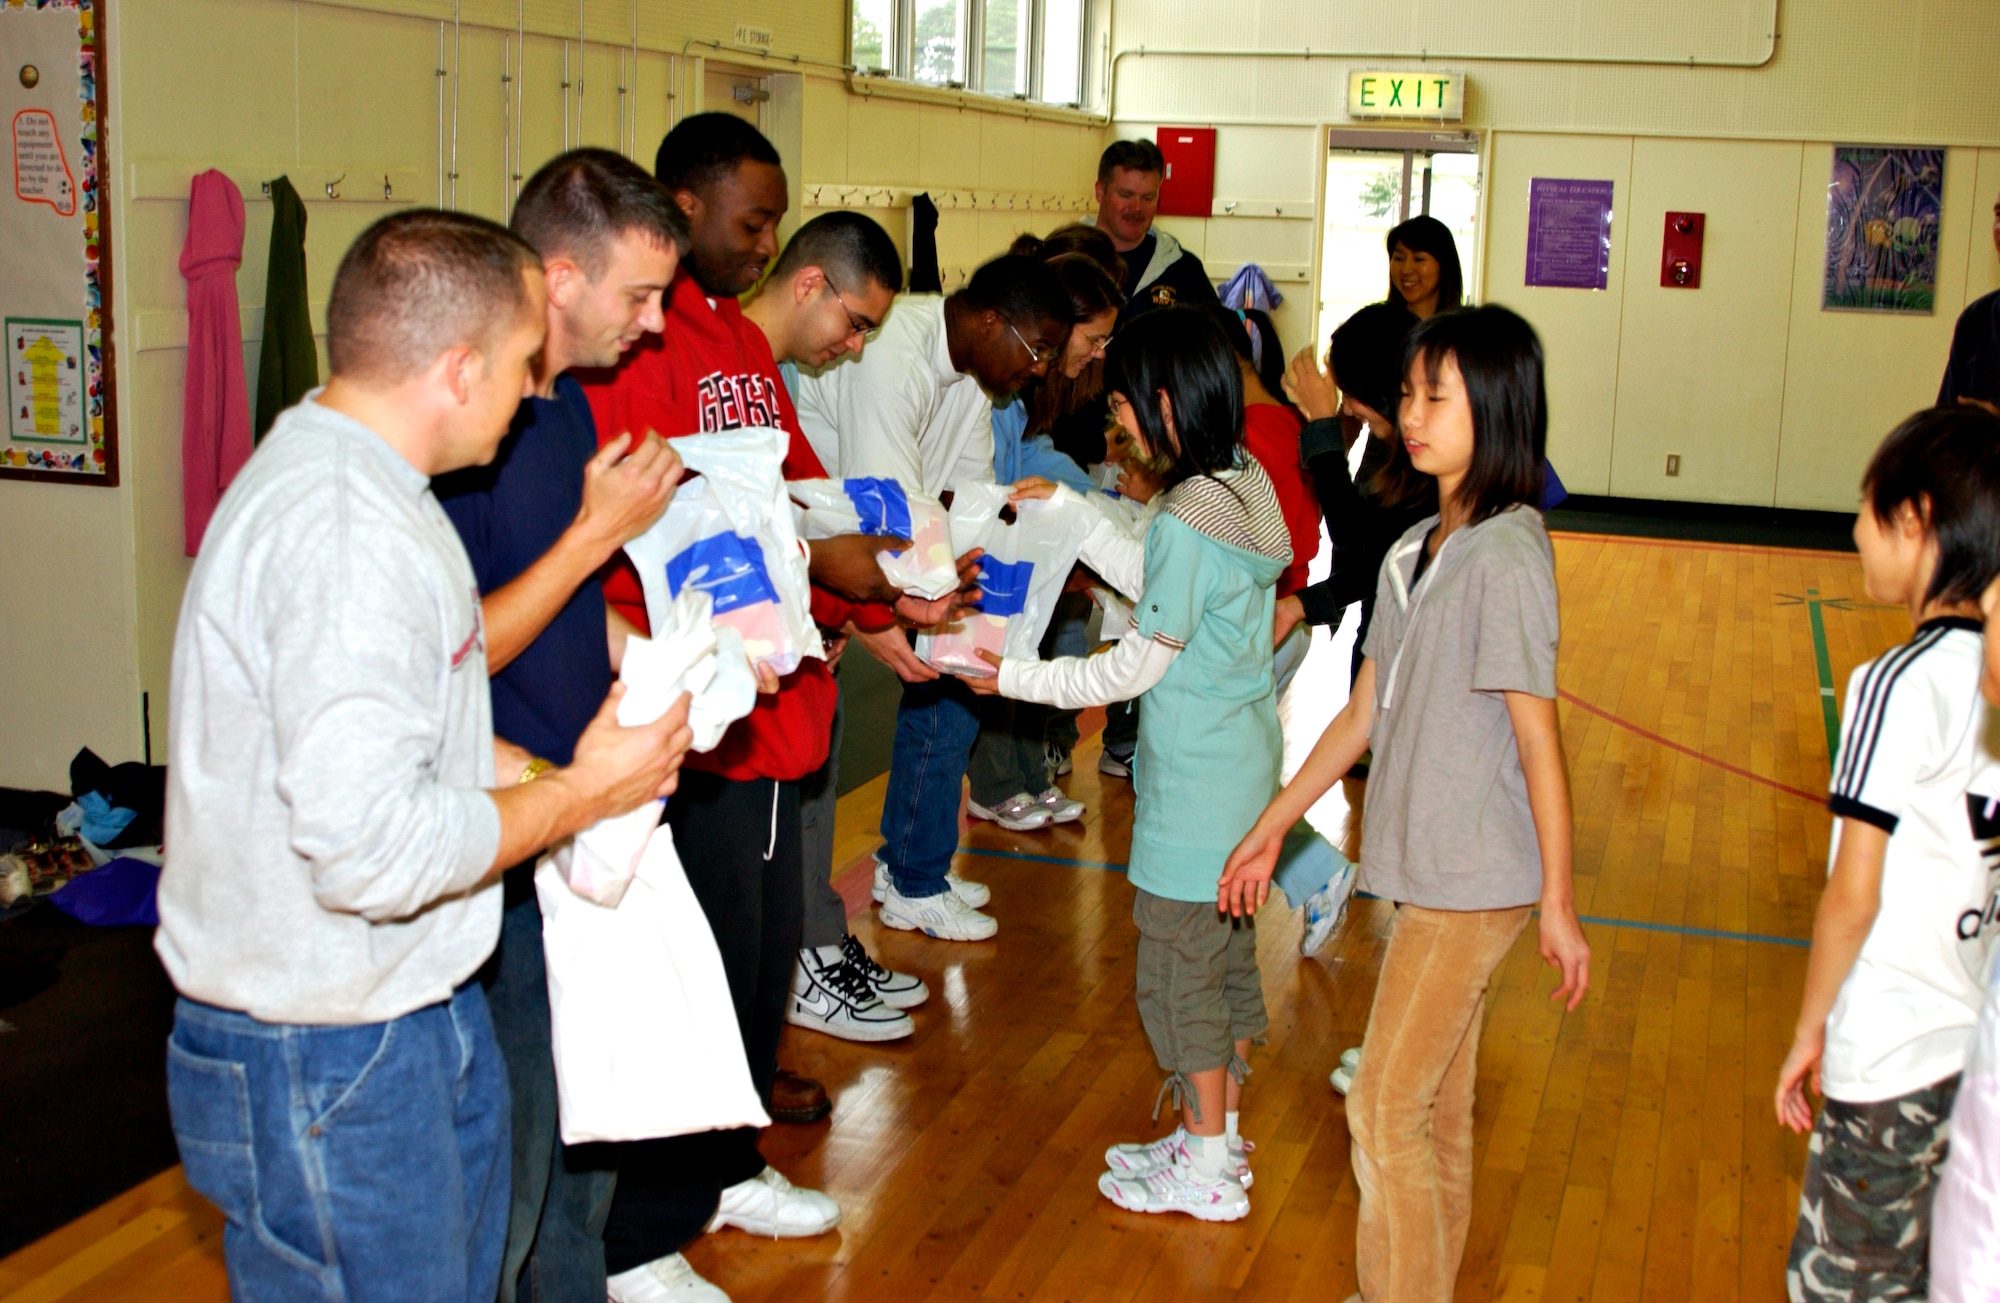 MISAWA AIR BASE, Japan -- Volunteers for a cultural exchange program are presented gifts from Japanese elementary school children at Sollars Elementary School, Oct. 20, 2007. This is the 15th year that the event has taken place.
(U.S. Air Force photo by Airman 1st Class Eric Harris)(RELEASED)